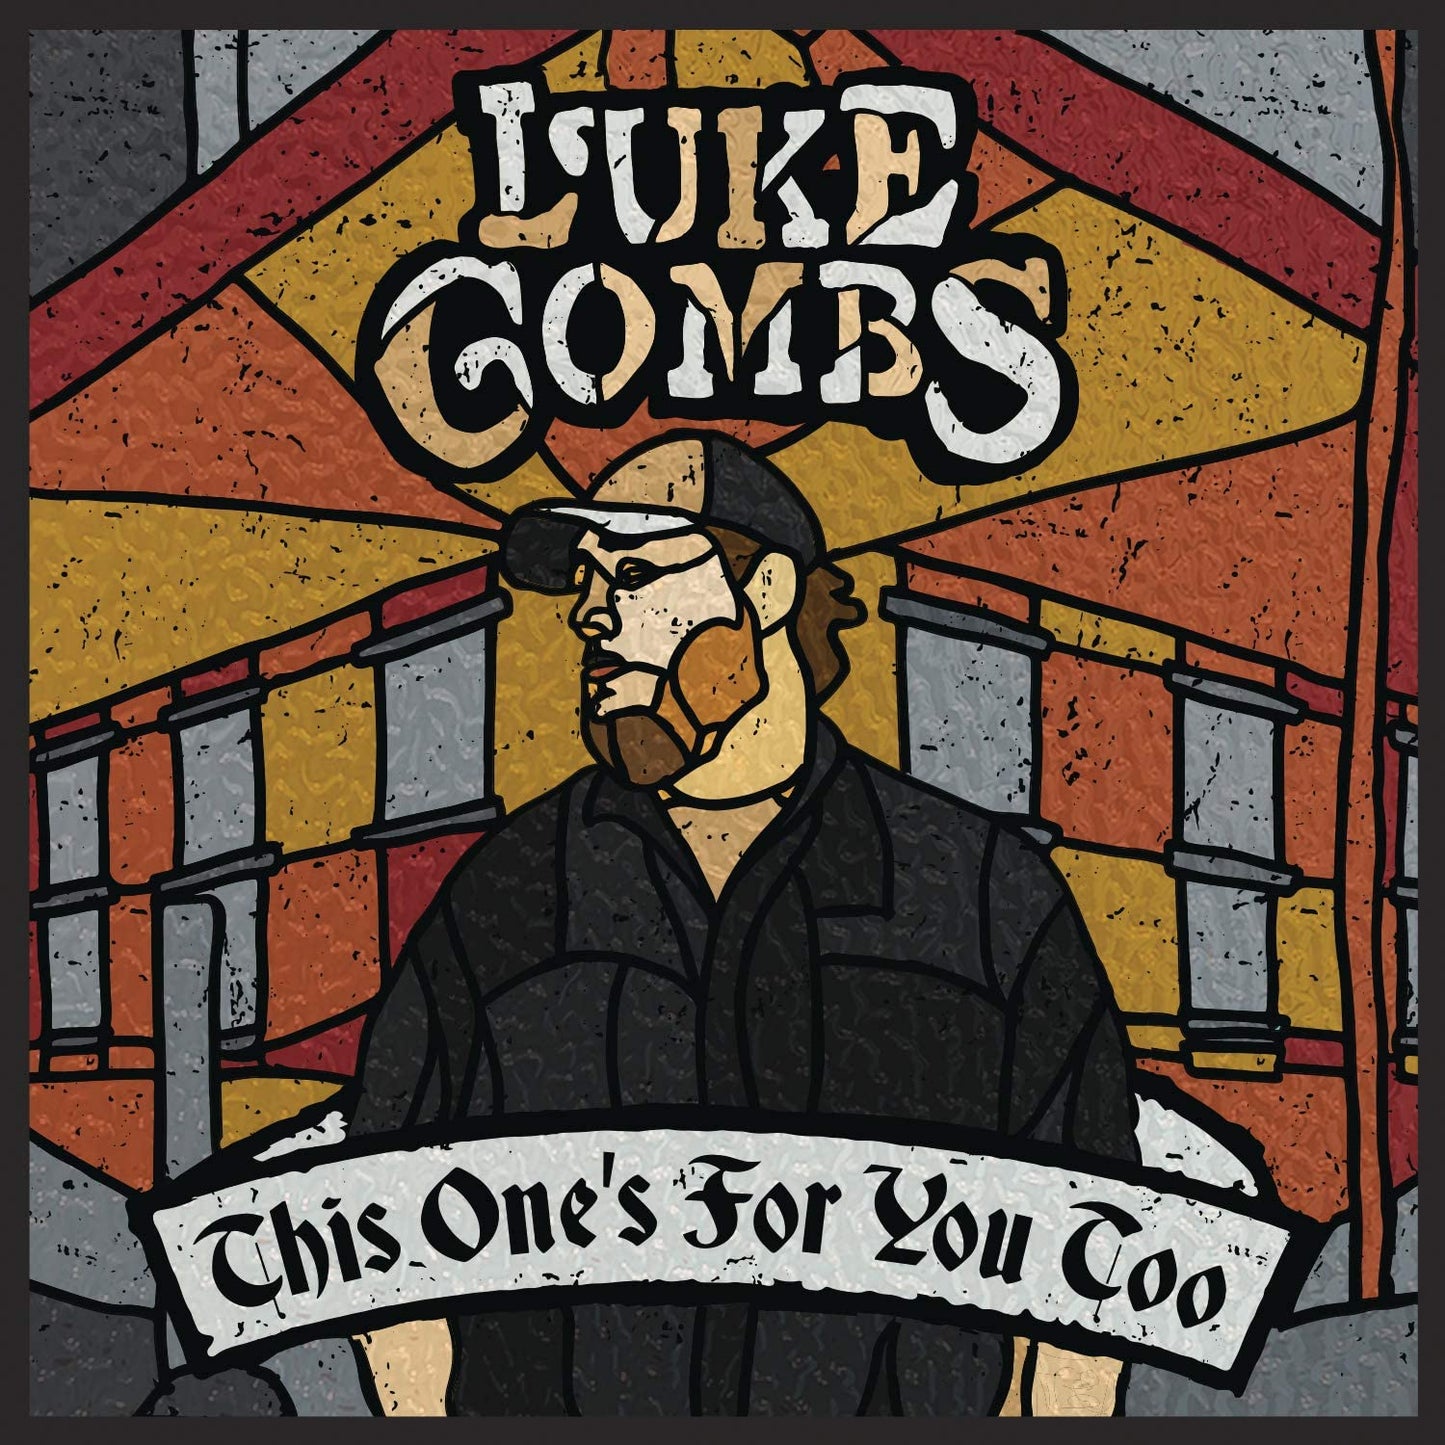 Combs, Luke/This One's For You Too [CD]